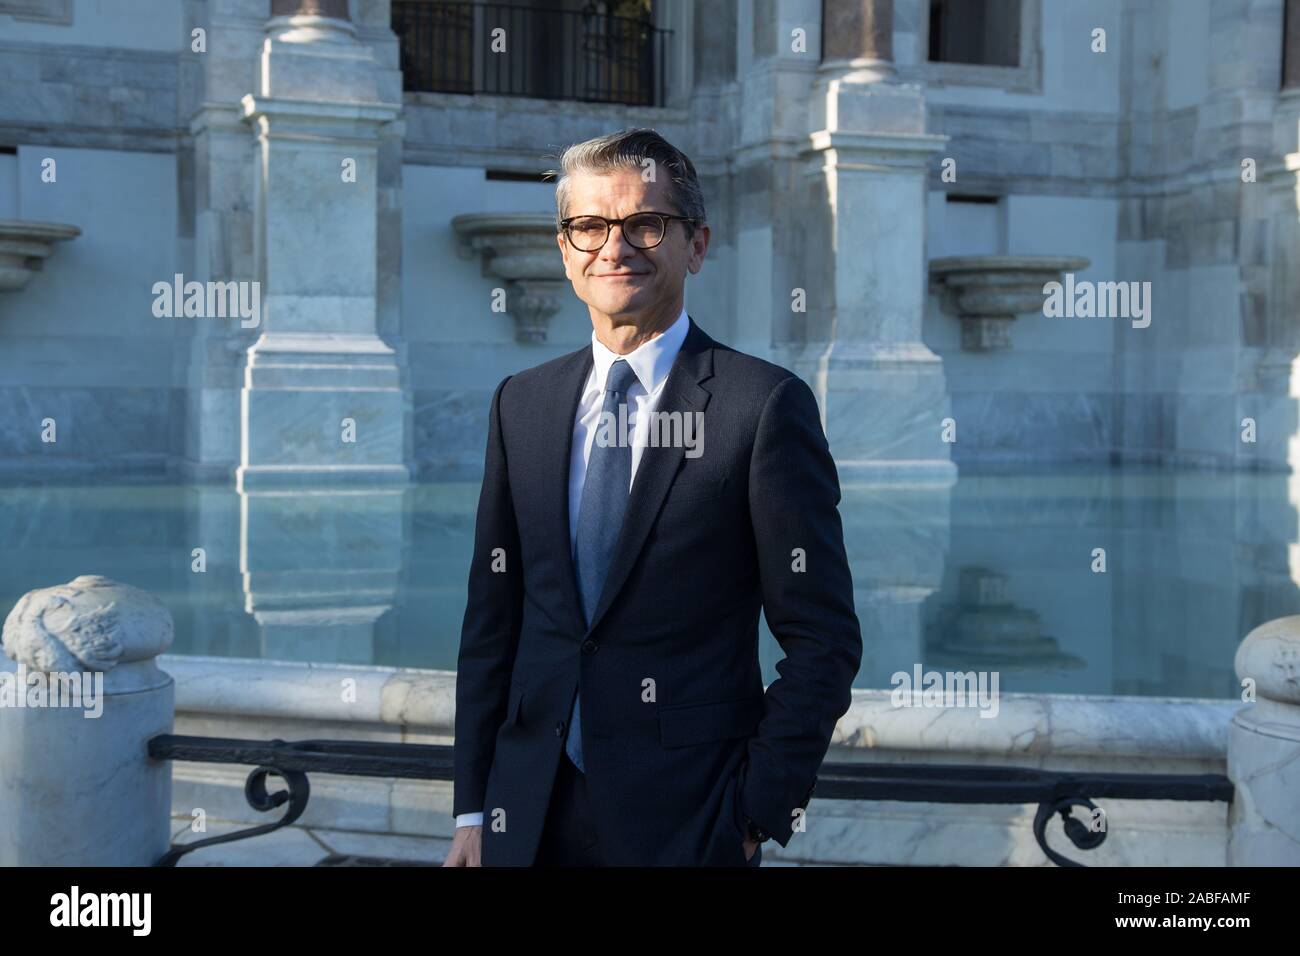 President and FENDI Serge Brunschwig Reopening ceremony of the Acqua Paola fountain (commonly known as "il Fontanone") by Matteo Nardone/Pacific Press Stock Photo - Alamy